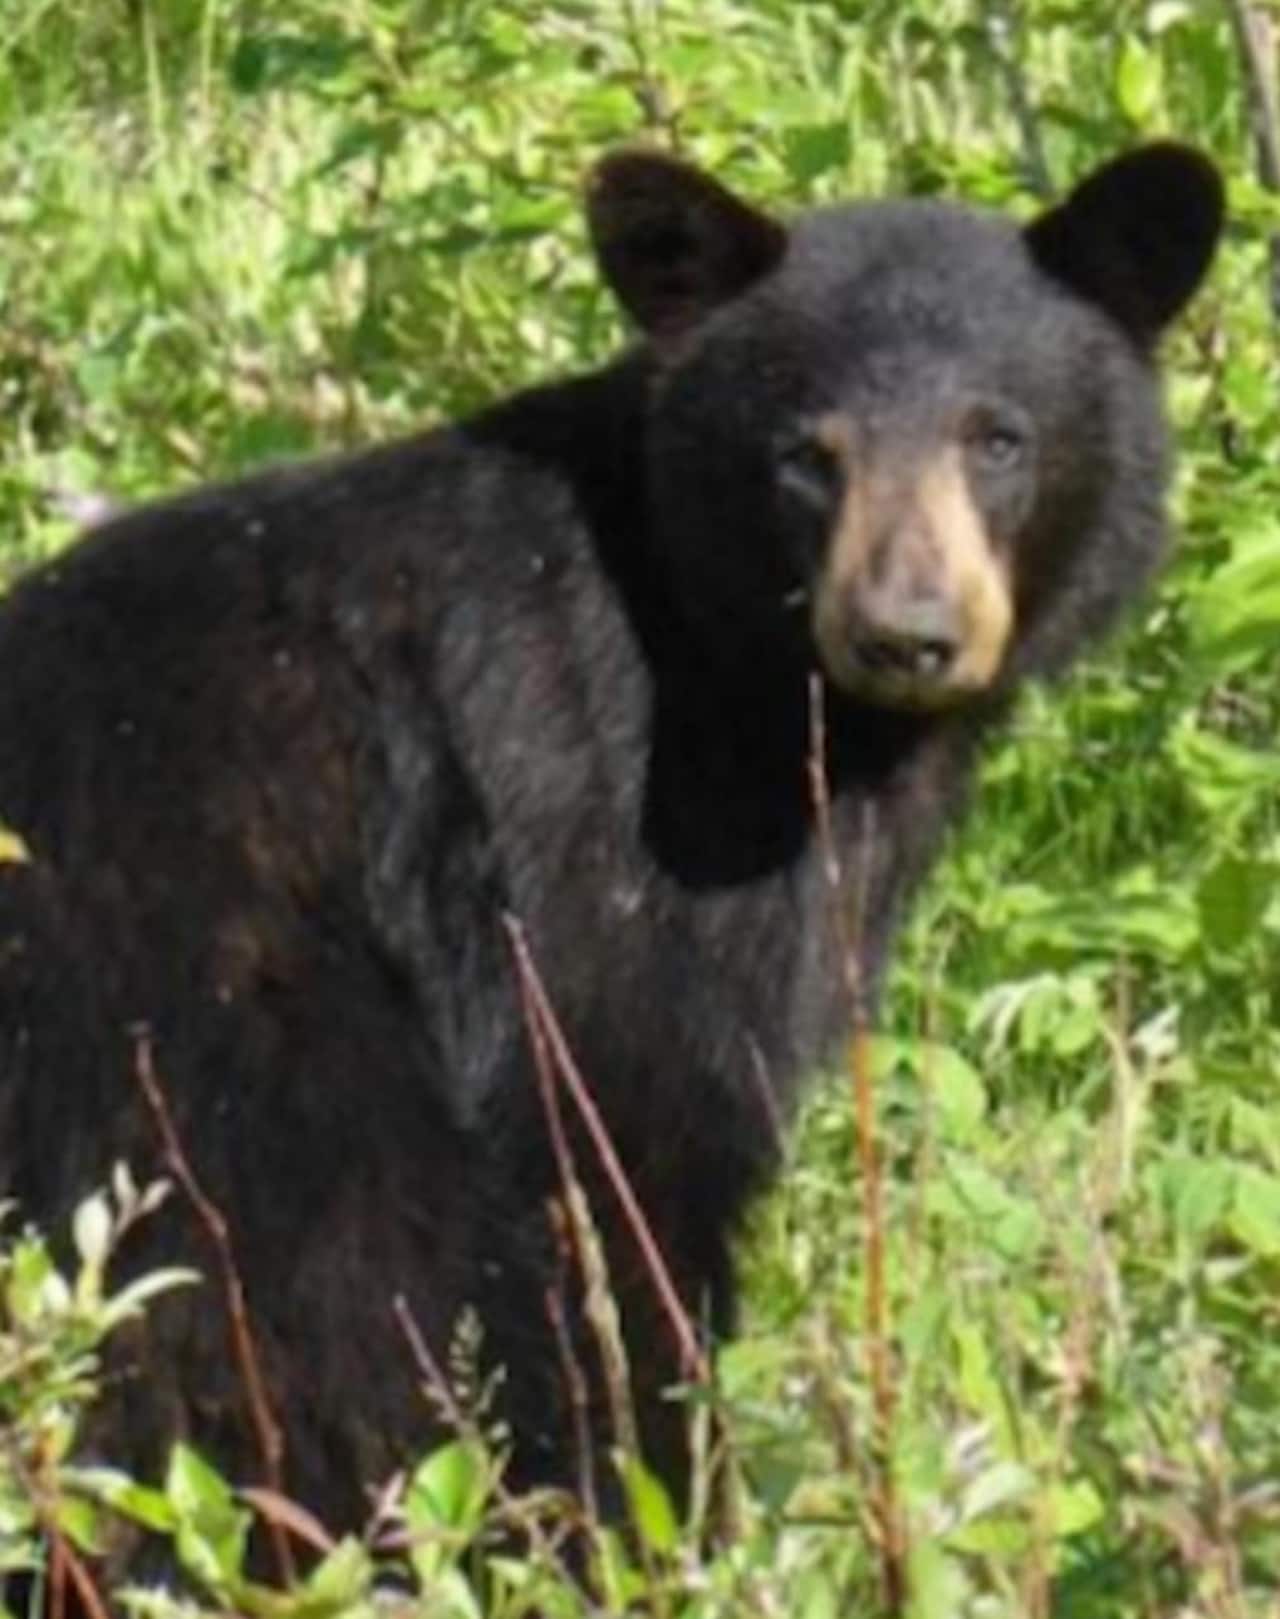 Two men were arrested on charges of illegally killing two bears in Wilton, Conn., which borders Westchester, on Saturday.